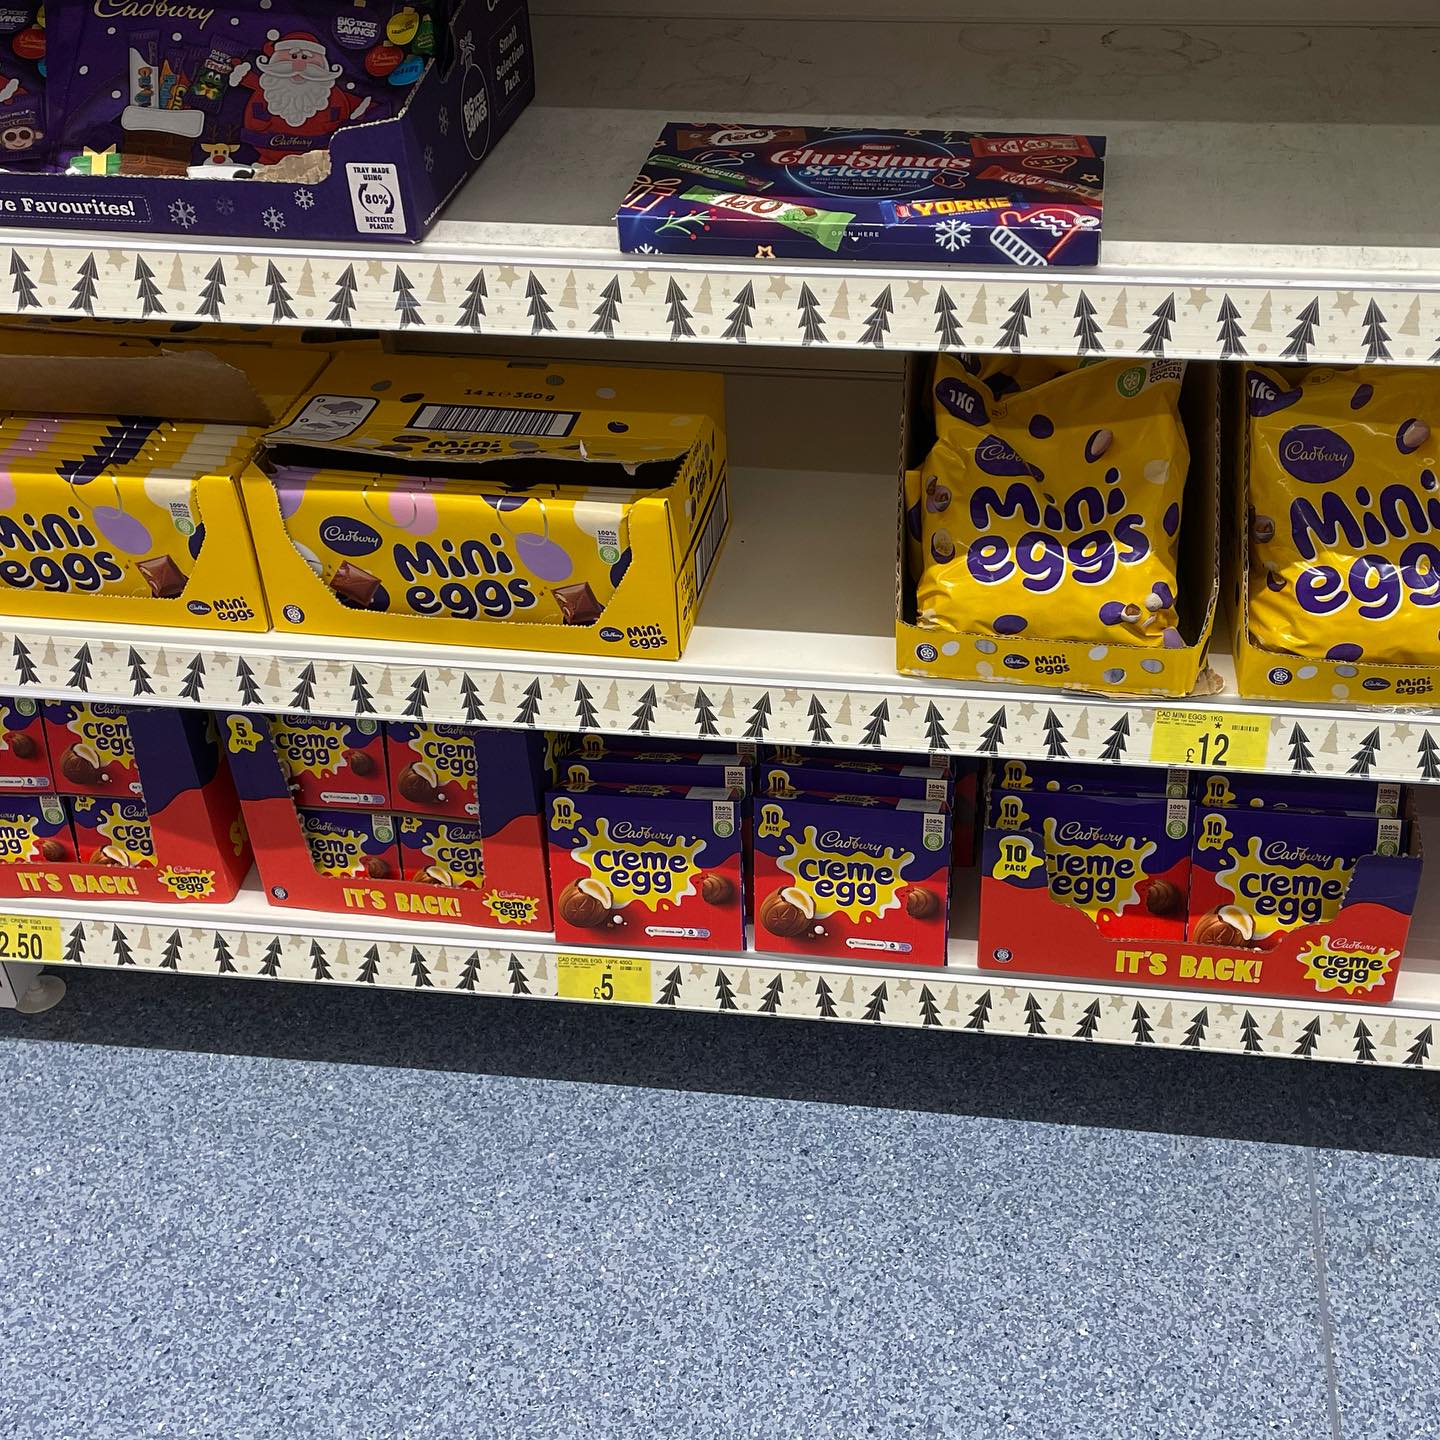 Easter eggs for sale in B&M stores.